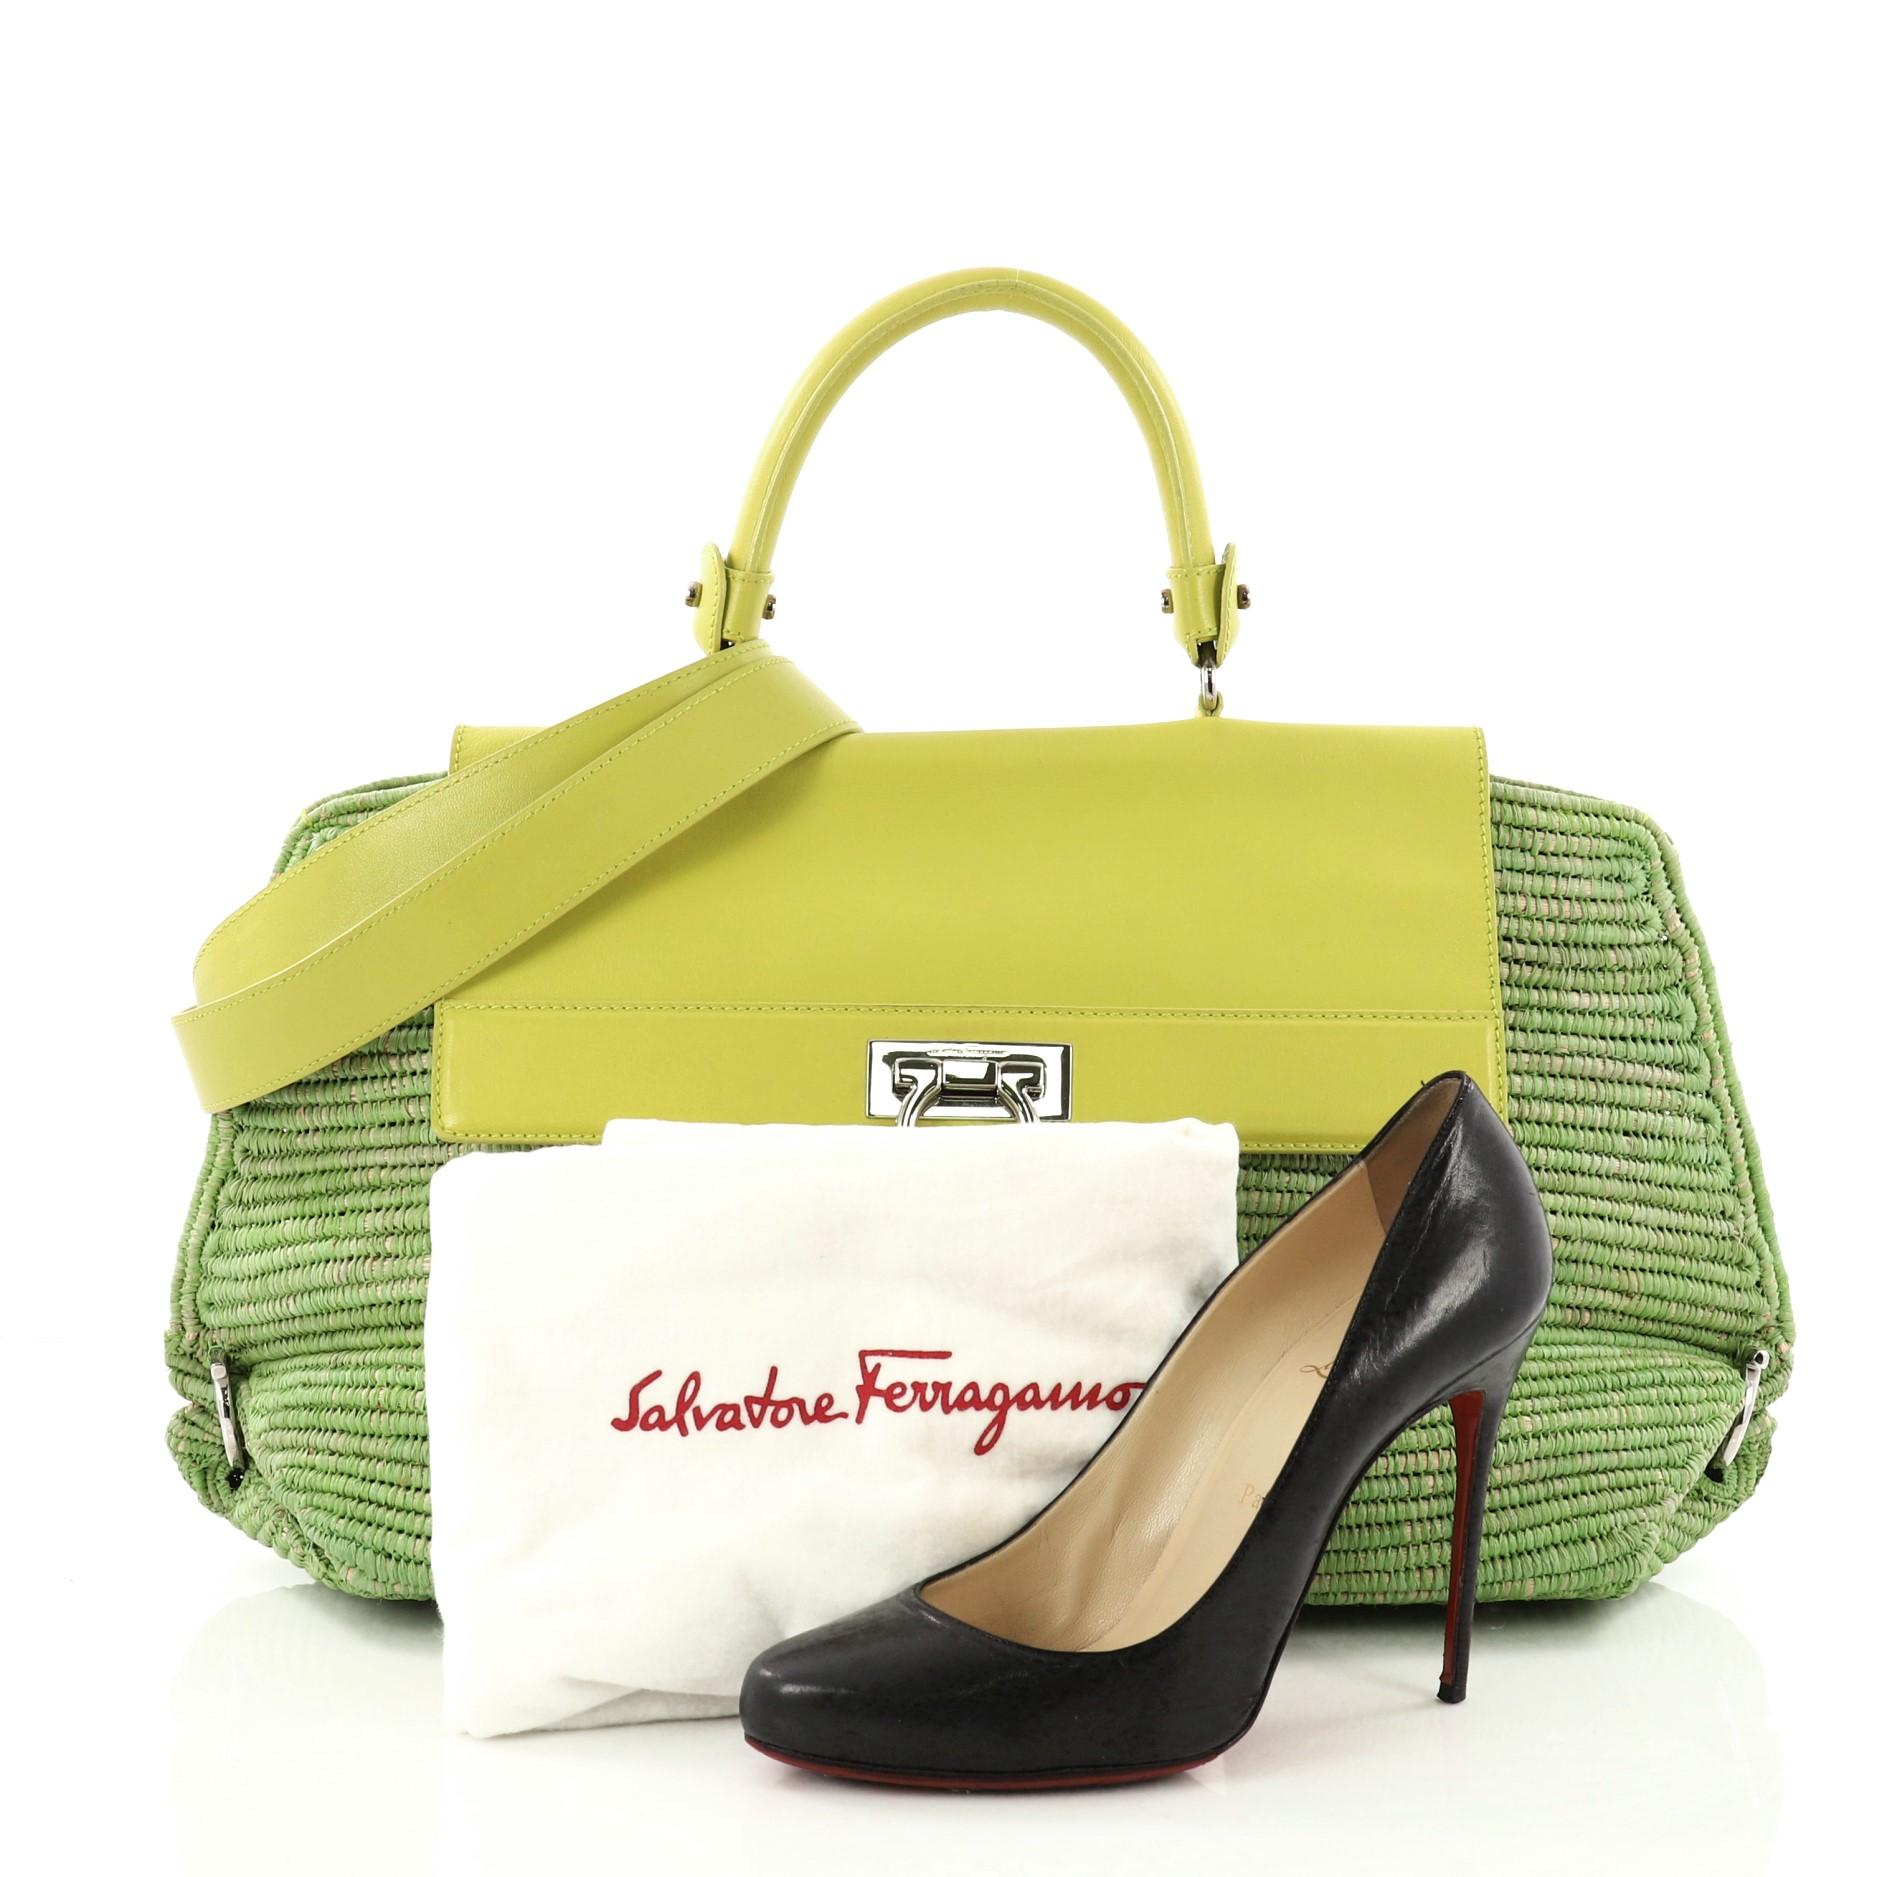 This authentic Salvatore Ferragamo Sofia Satchel Raffia with Leather Large is stylish and functional bag perfect for the modern woman. Crafted from green raffia, this bag features a sturdy top handle, leather flap, protective base studs, and